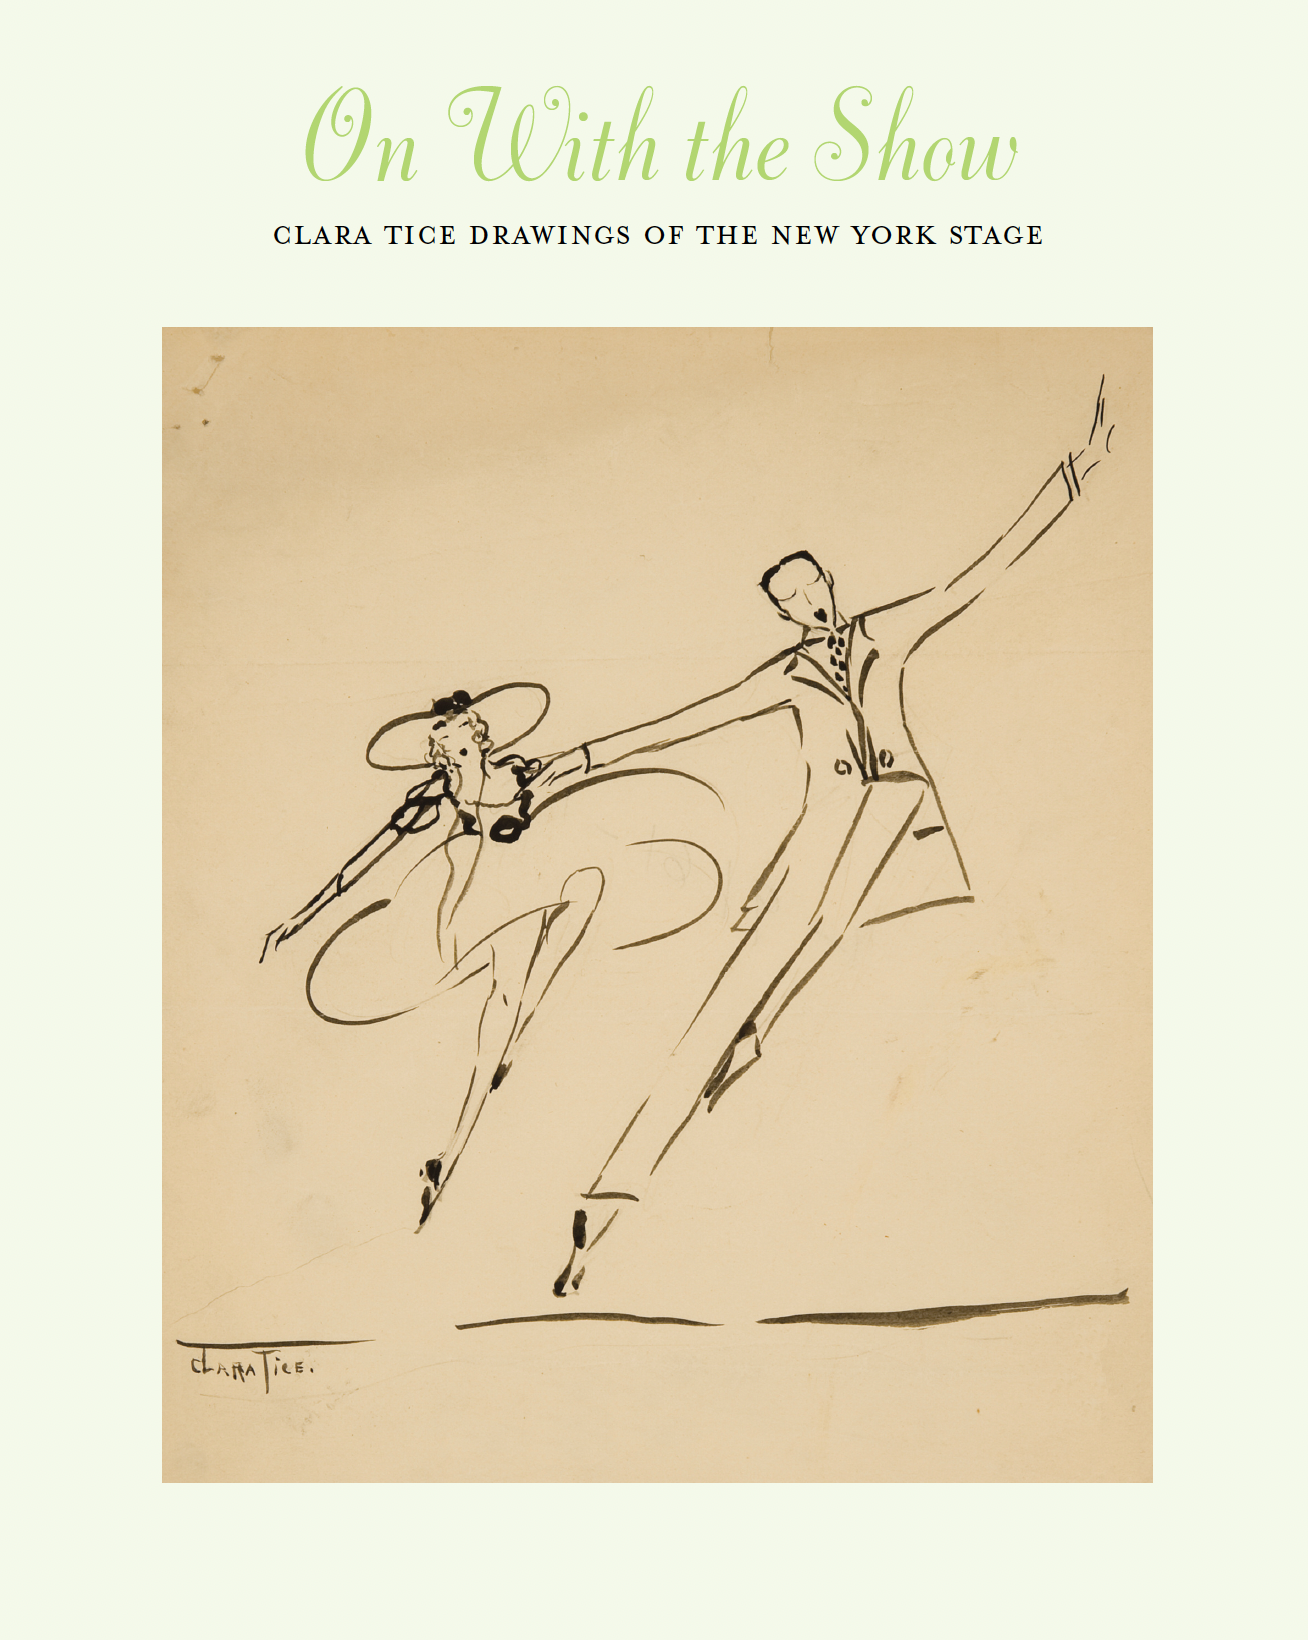 On With the Show # Clara Tice Drawings of # the New York Stage # 2011 &lt;alt="Catalogue cover with title and an ink drawing of a woman and man dancing."&gt;